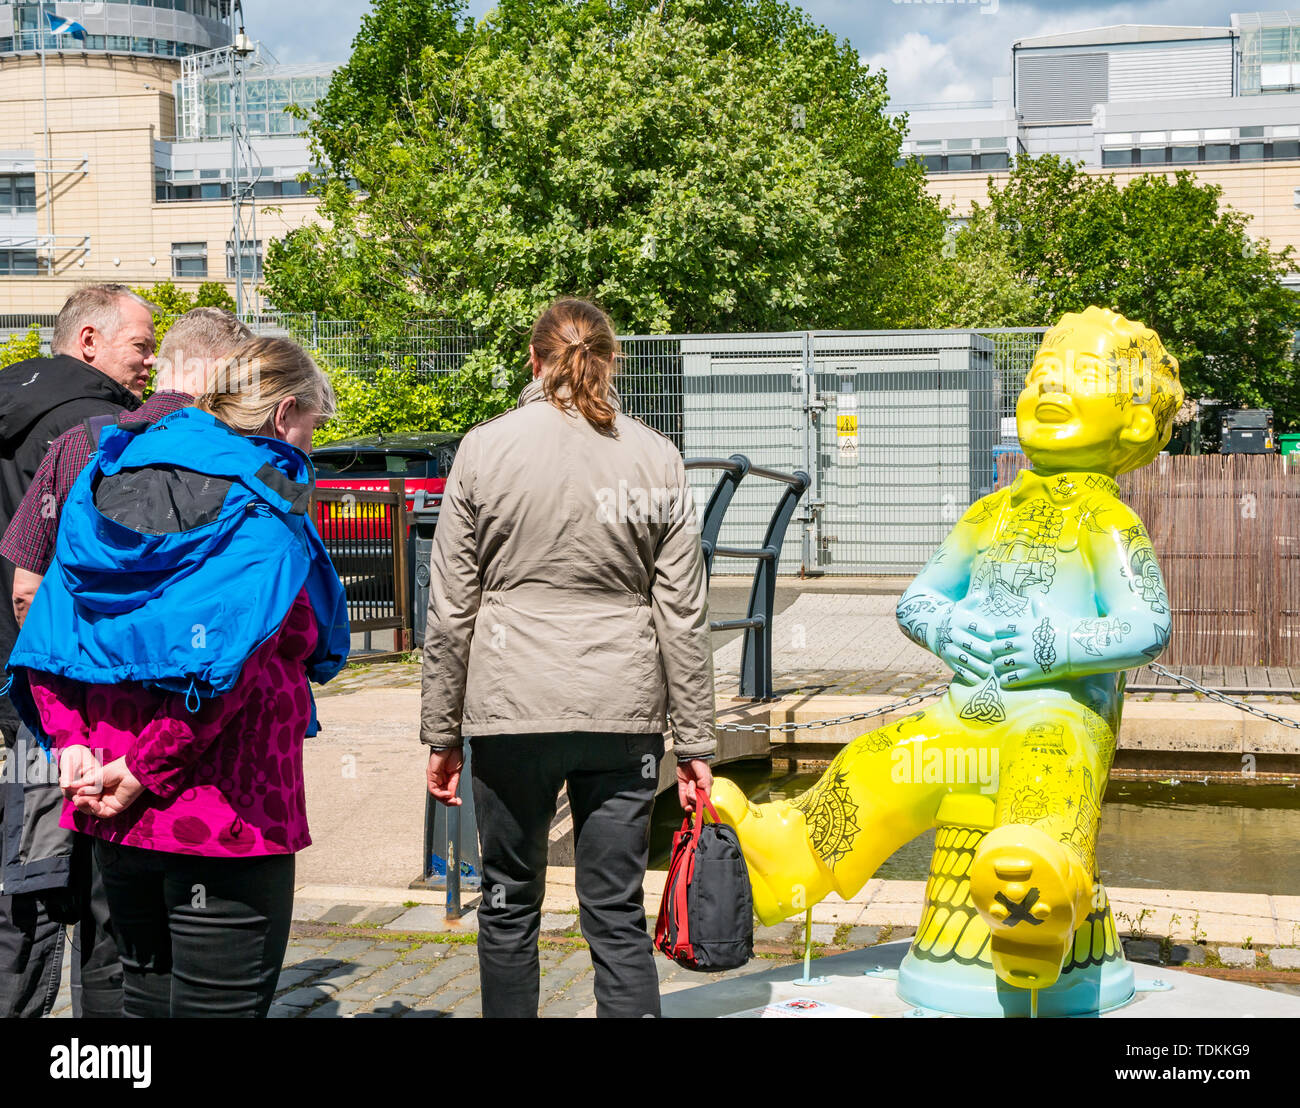 Leith, Edinburgh, Scotland, United Kingdom, 17 June 2019. Oor Wullie's Big Bucket Trail: An art trail of 200 Oor Wullie sculptures appear in Scottish cities in a mass arts event that lasts until August 30th. Oor Wullie is an iconic Scottish cartoon character from the Sunday Post newspaper. The sculptures will be auctioned to raise money for Scotland’s children’s hospital charities. There are 5 in the Leith area, and 60 in Edinburgh altogether.  Sailoor Wullie by The Leith Agency with tourists looking Stock Photo